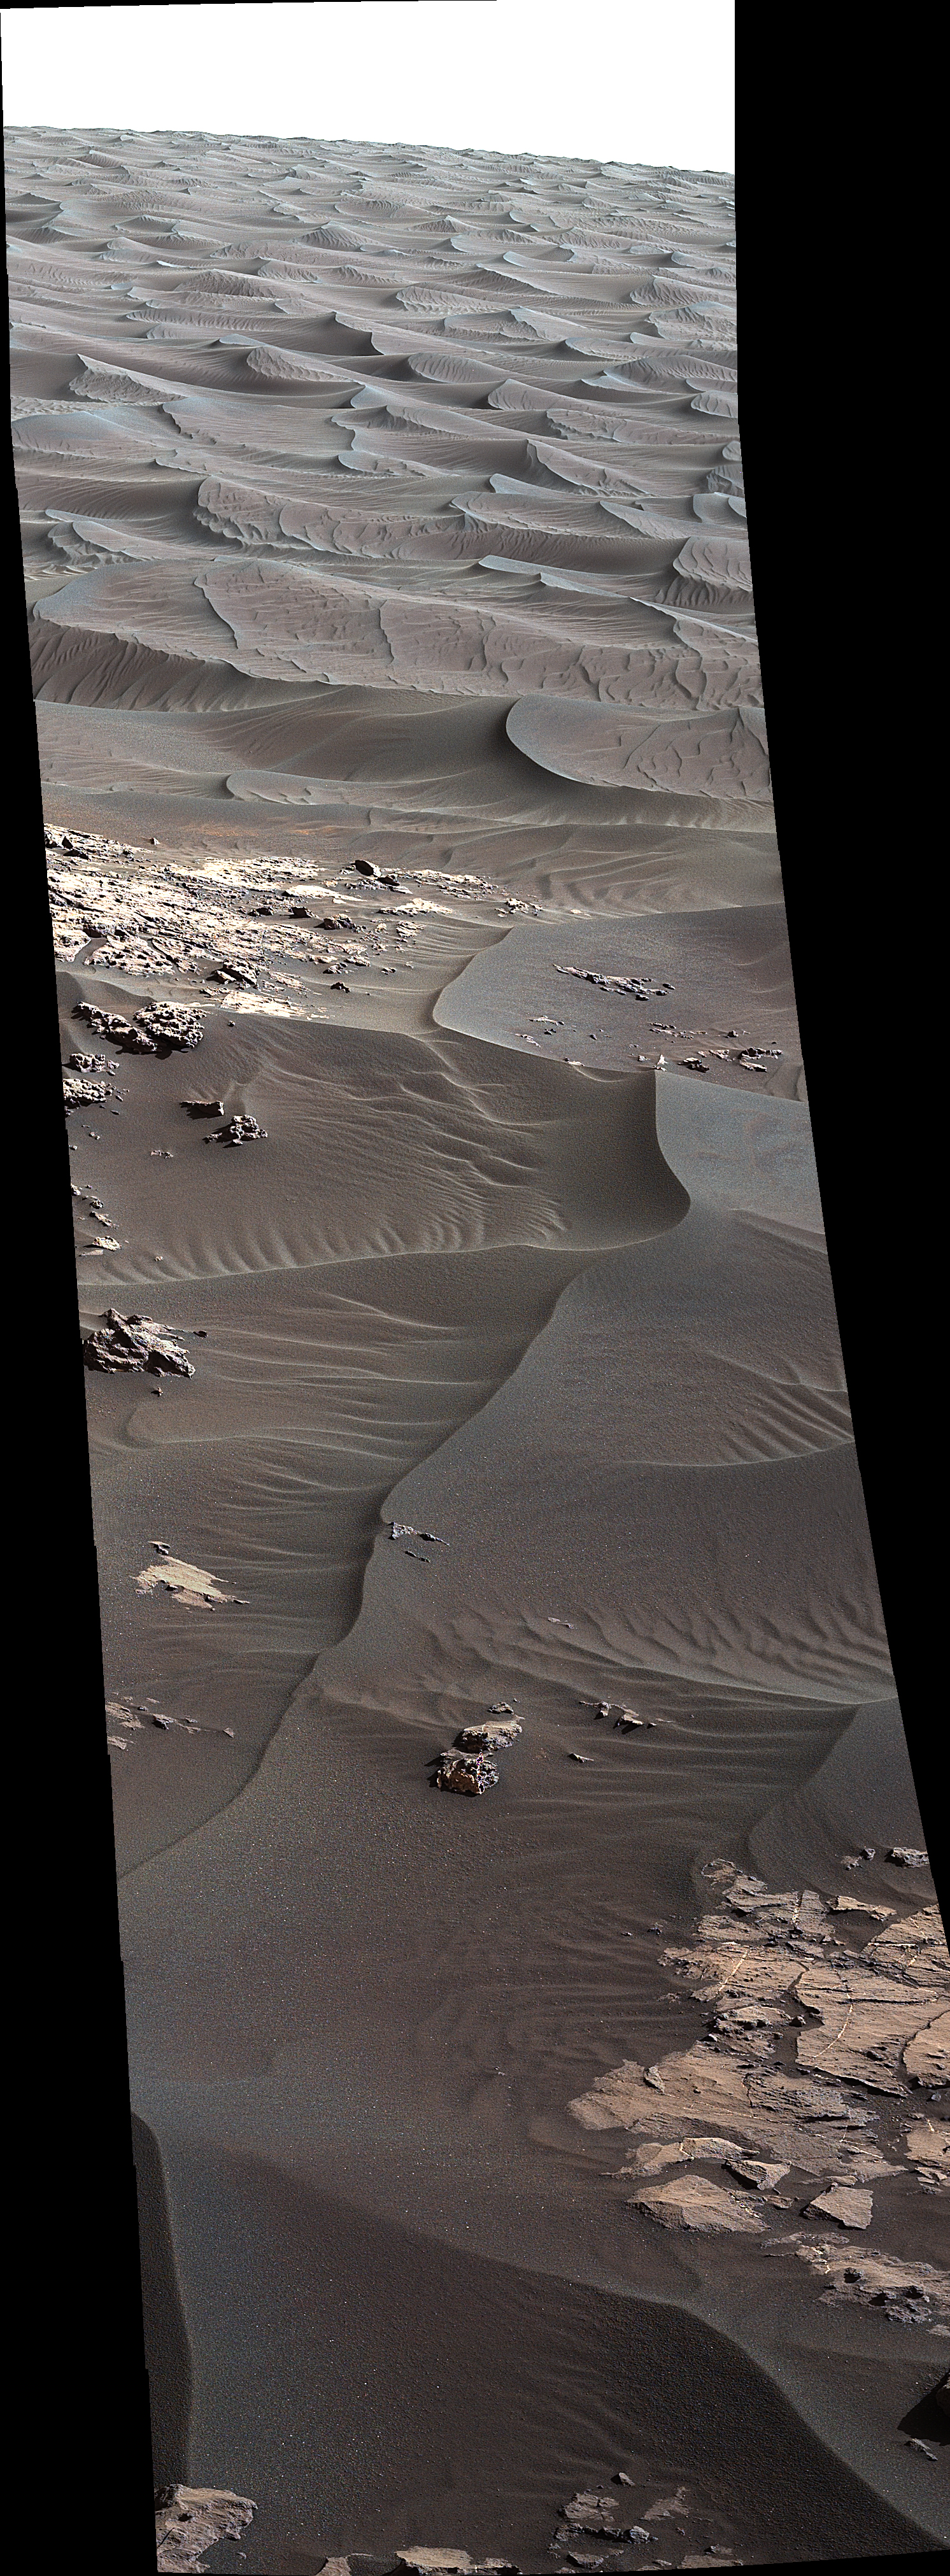 Ripples on Martian sand dunes show signs that wind moves them today, in NASA's first ever close-up view of active sand dunes, seen by Mars rover Curiosity.